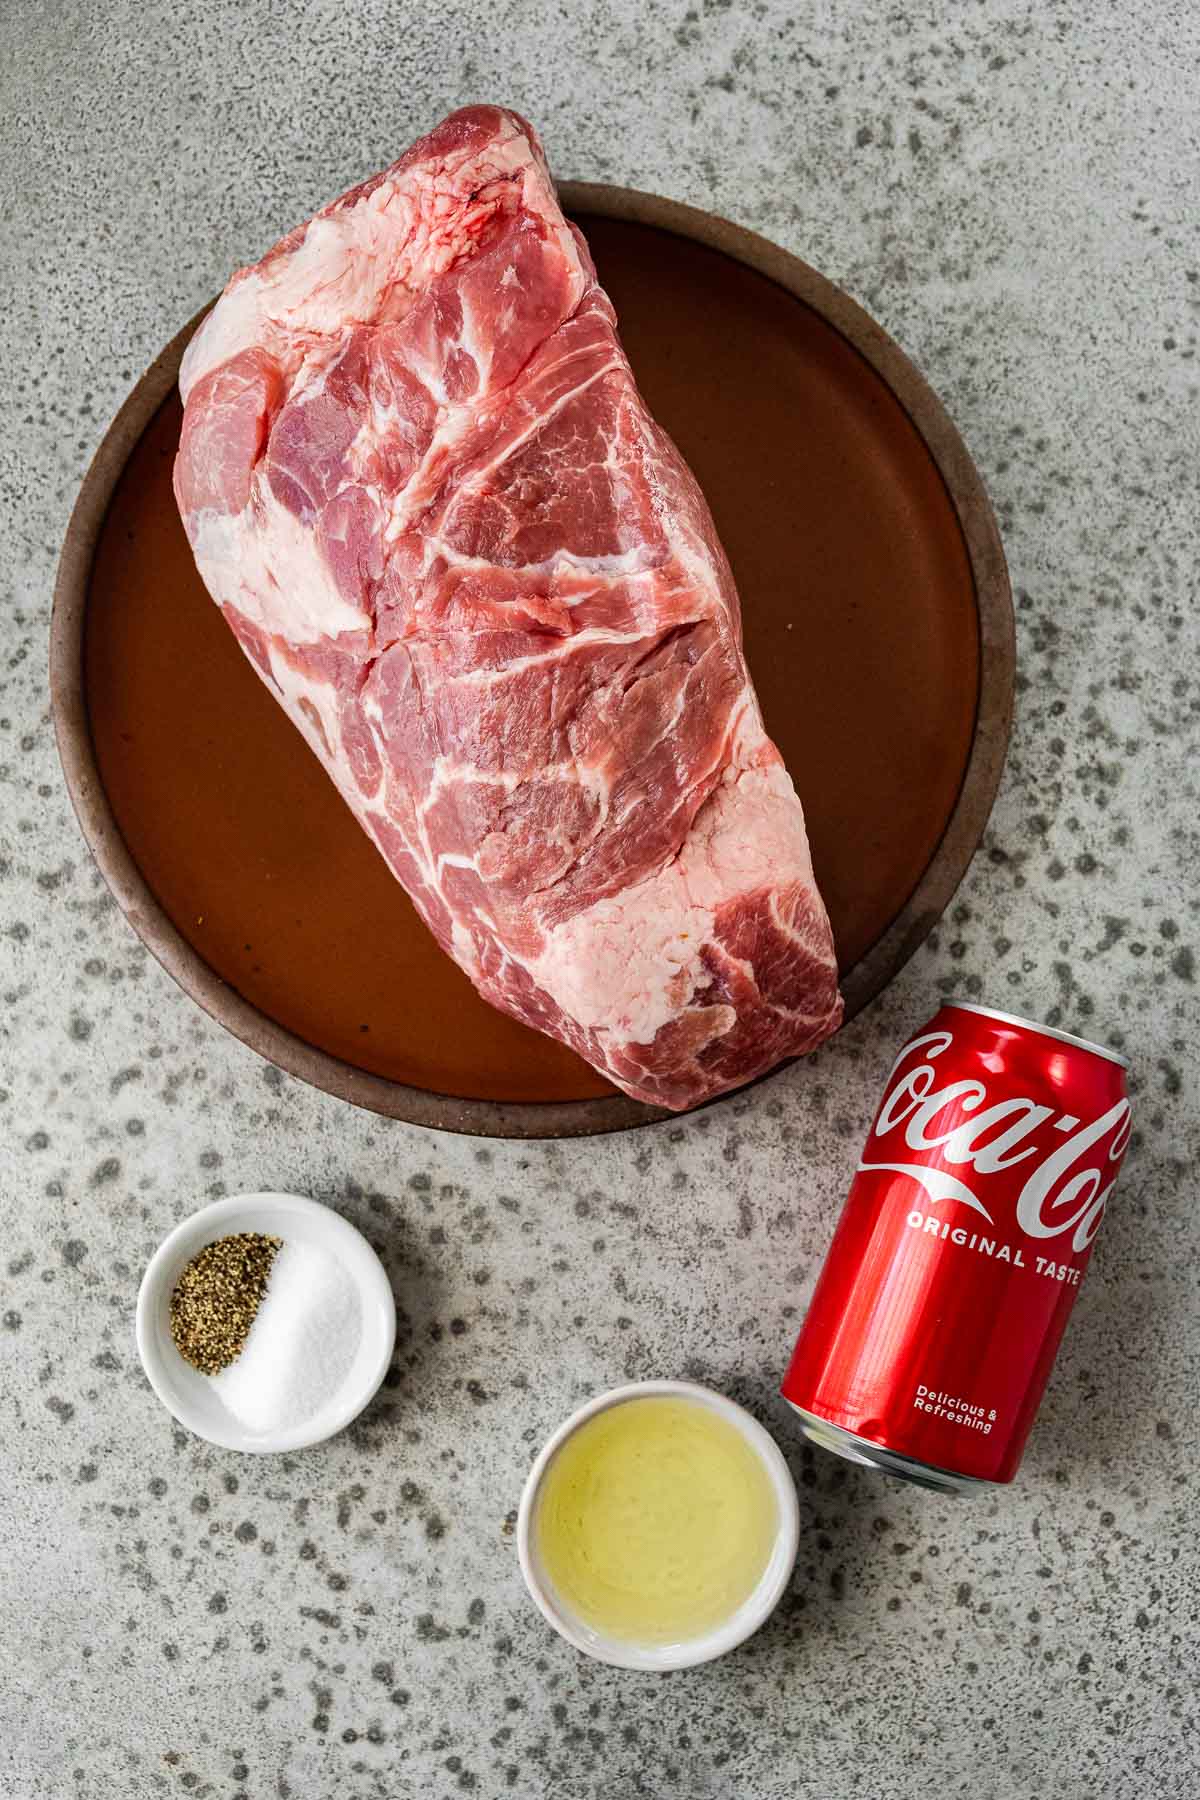 Coca Cola Pulled Pork ingredients spread out